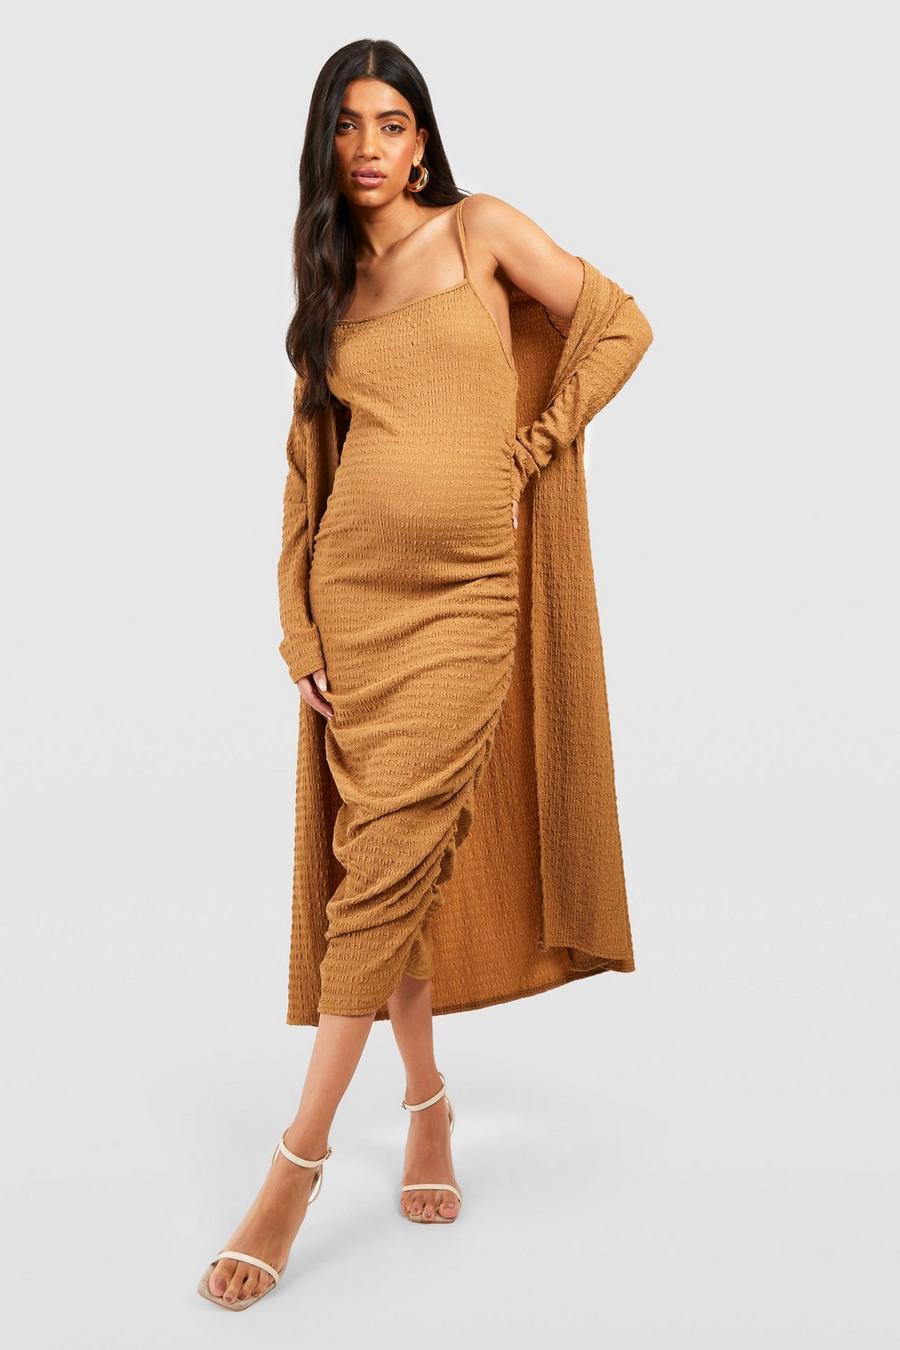 Mocha beige Maternity Textured Strappy Dress And Duster Coat